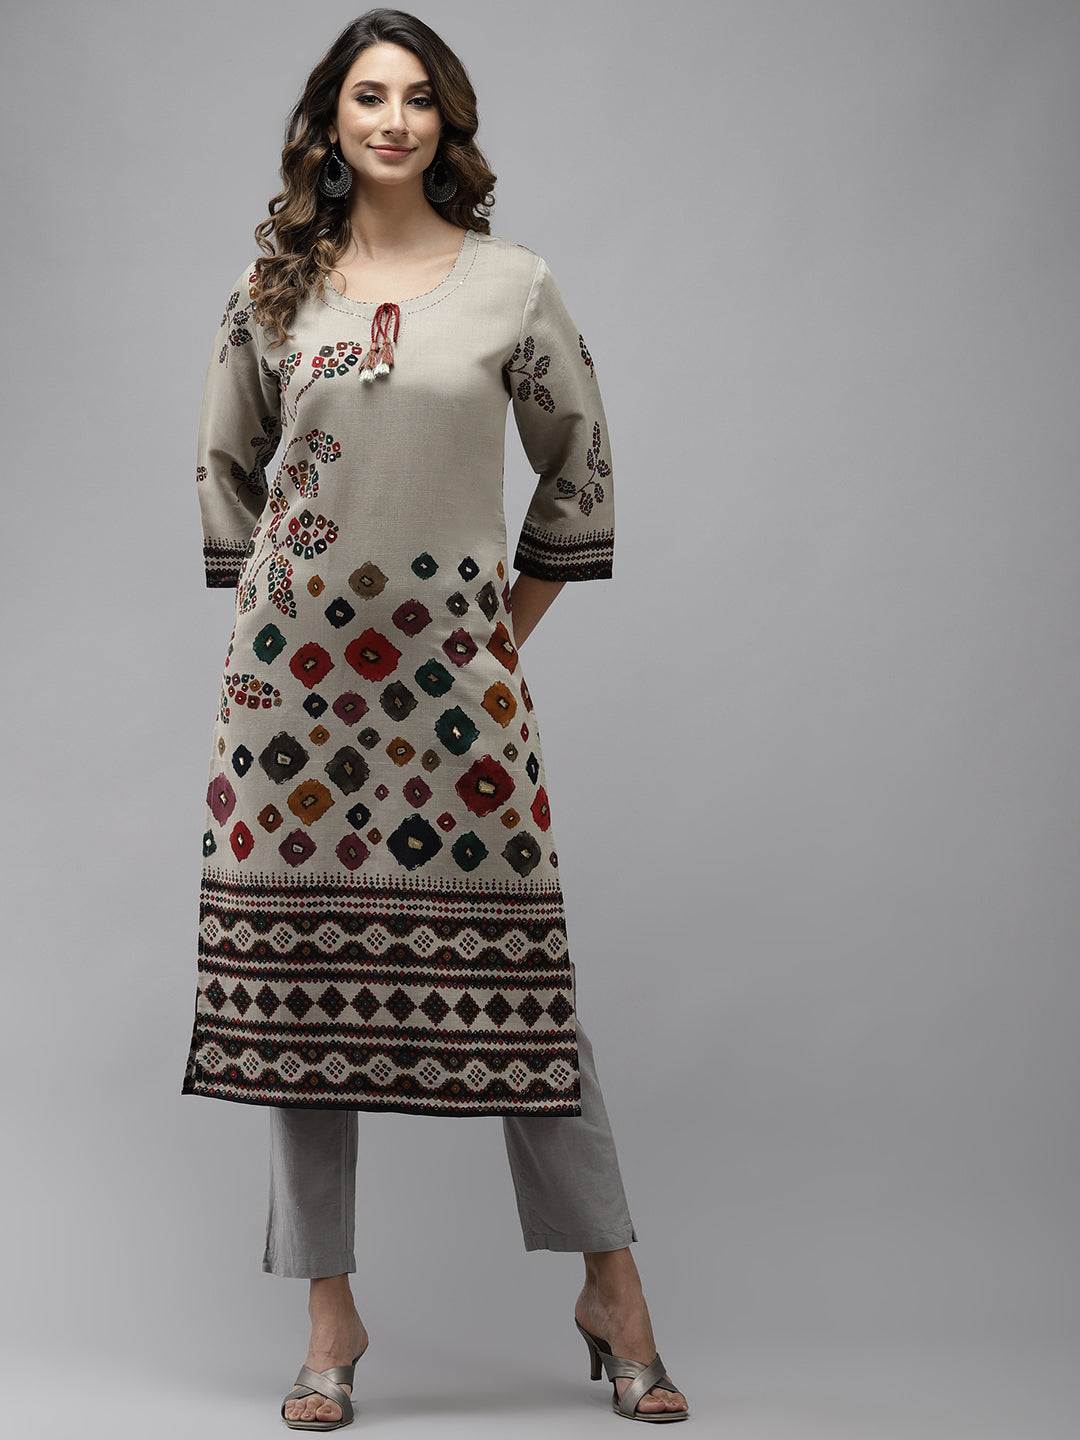 31 Different Styles of Kurtis - Every Womens Must Checkout – MISSPRINT